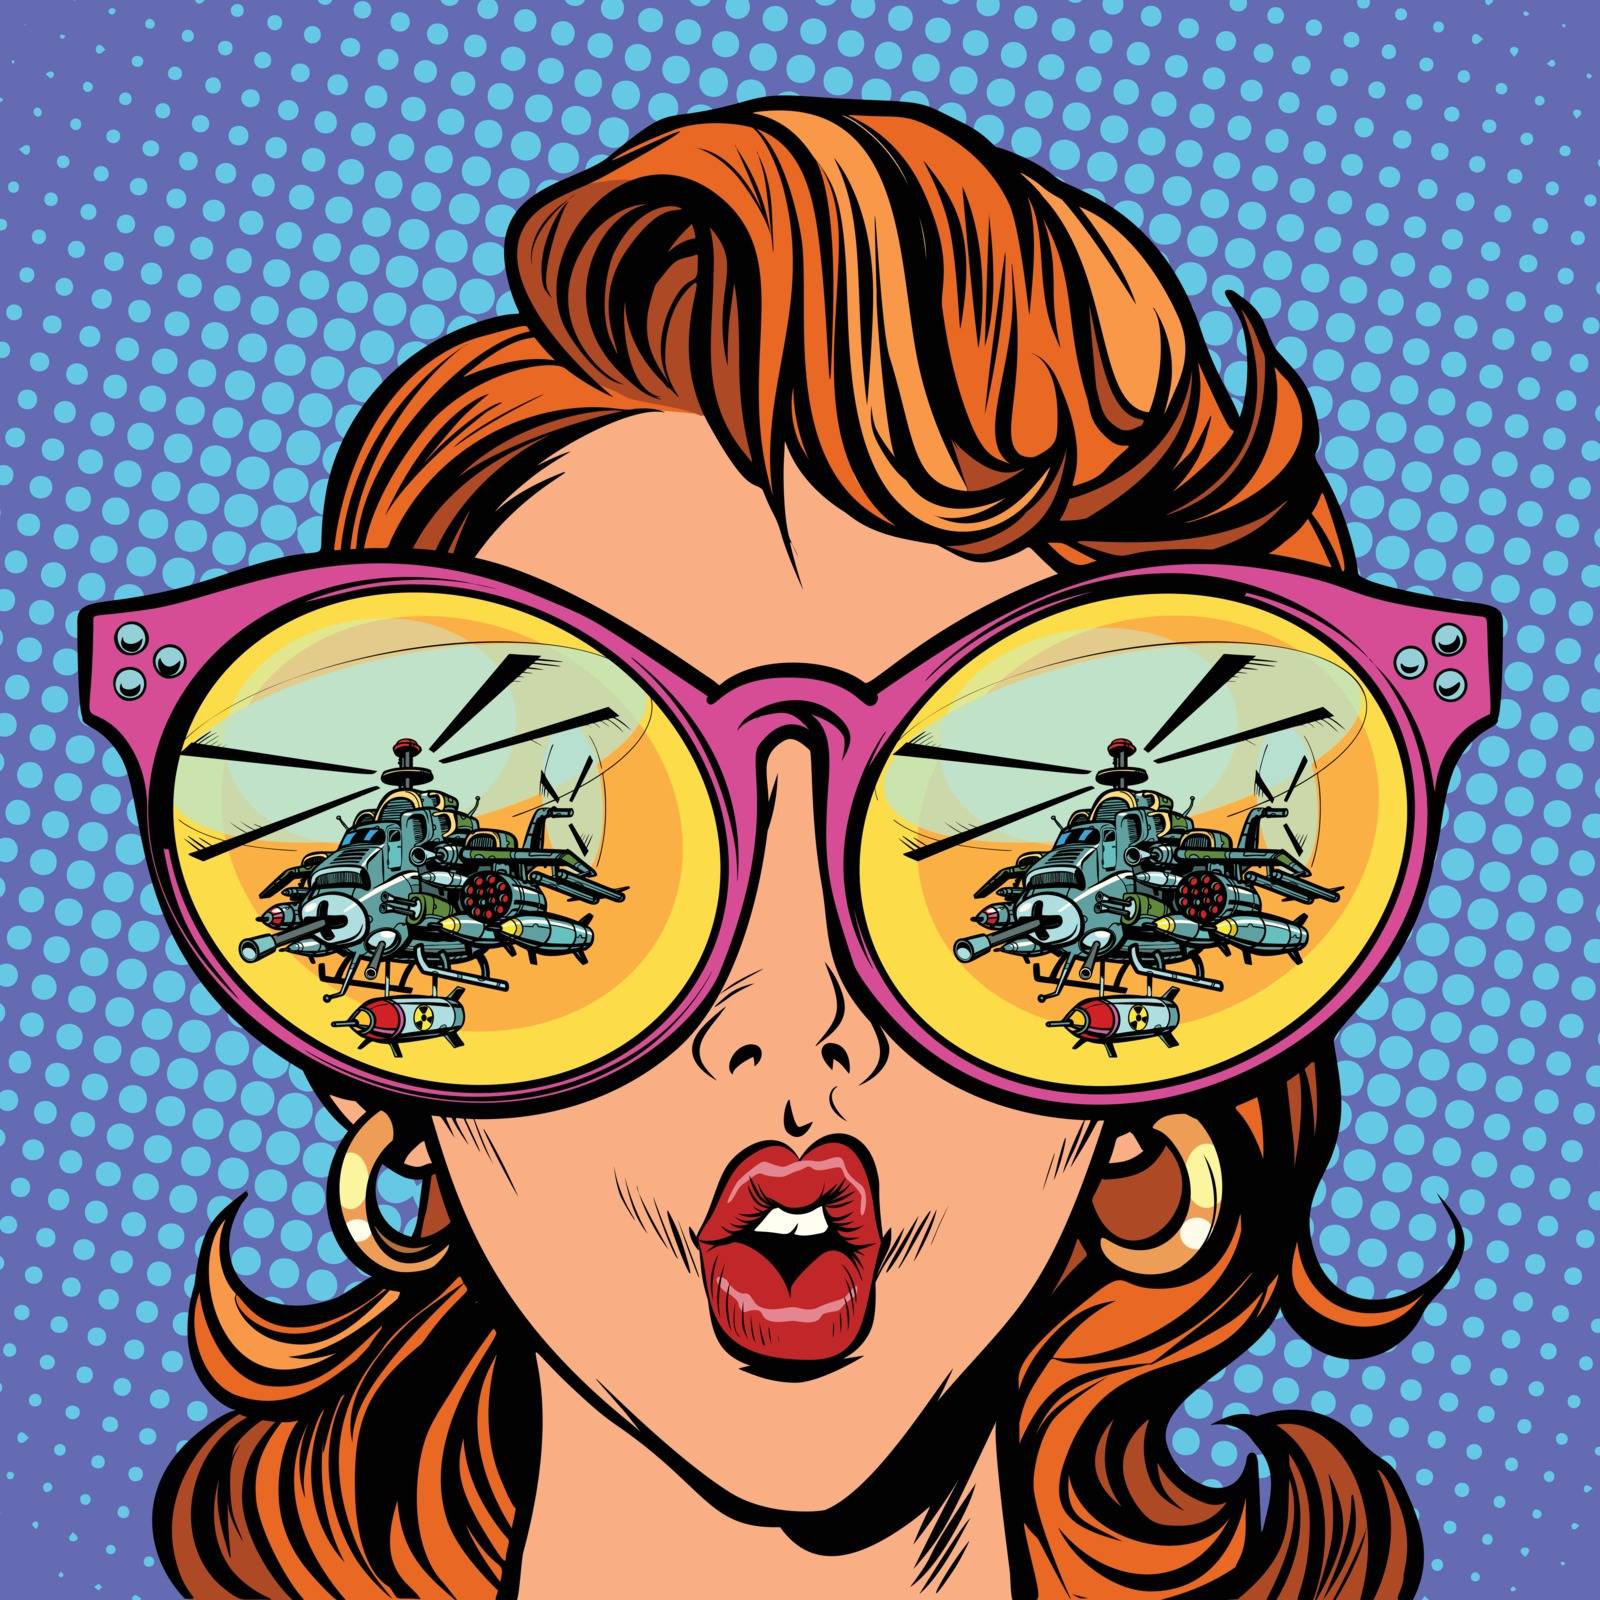 Woman with sunglasses. military helicopter in reflection. Comic cartoon pop art retro illustration vector kitsch drawing